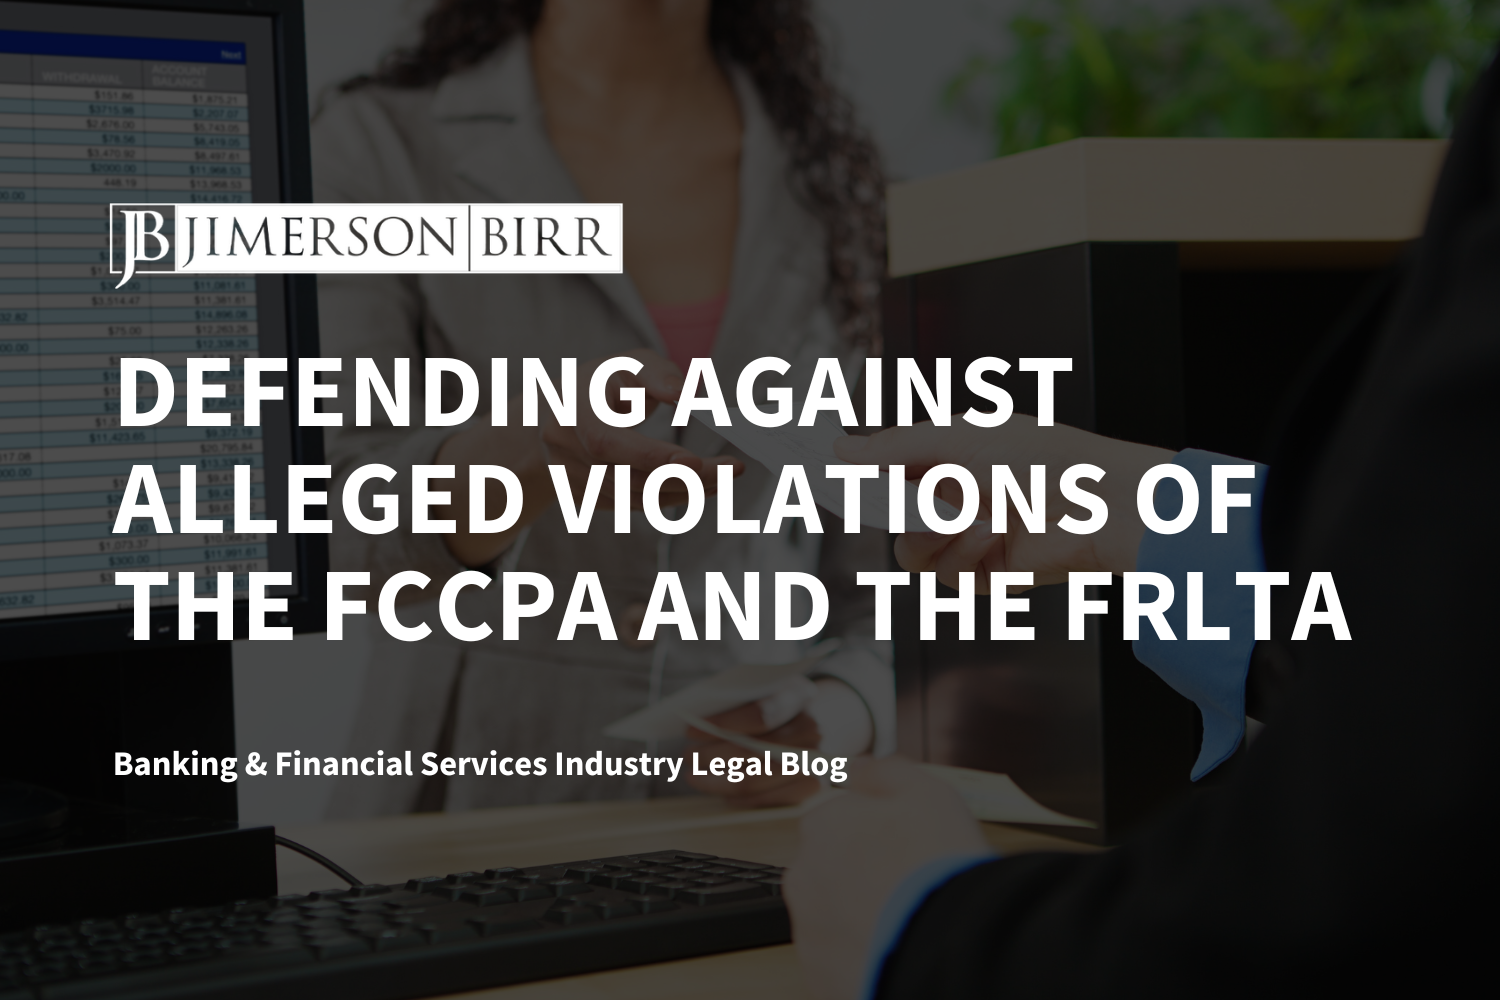 Defending Against Alleged Violations of the FCCPA and the FRLTA